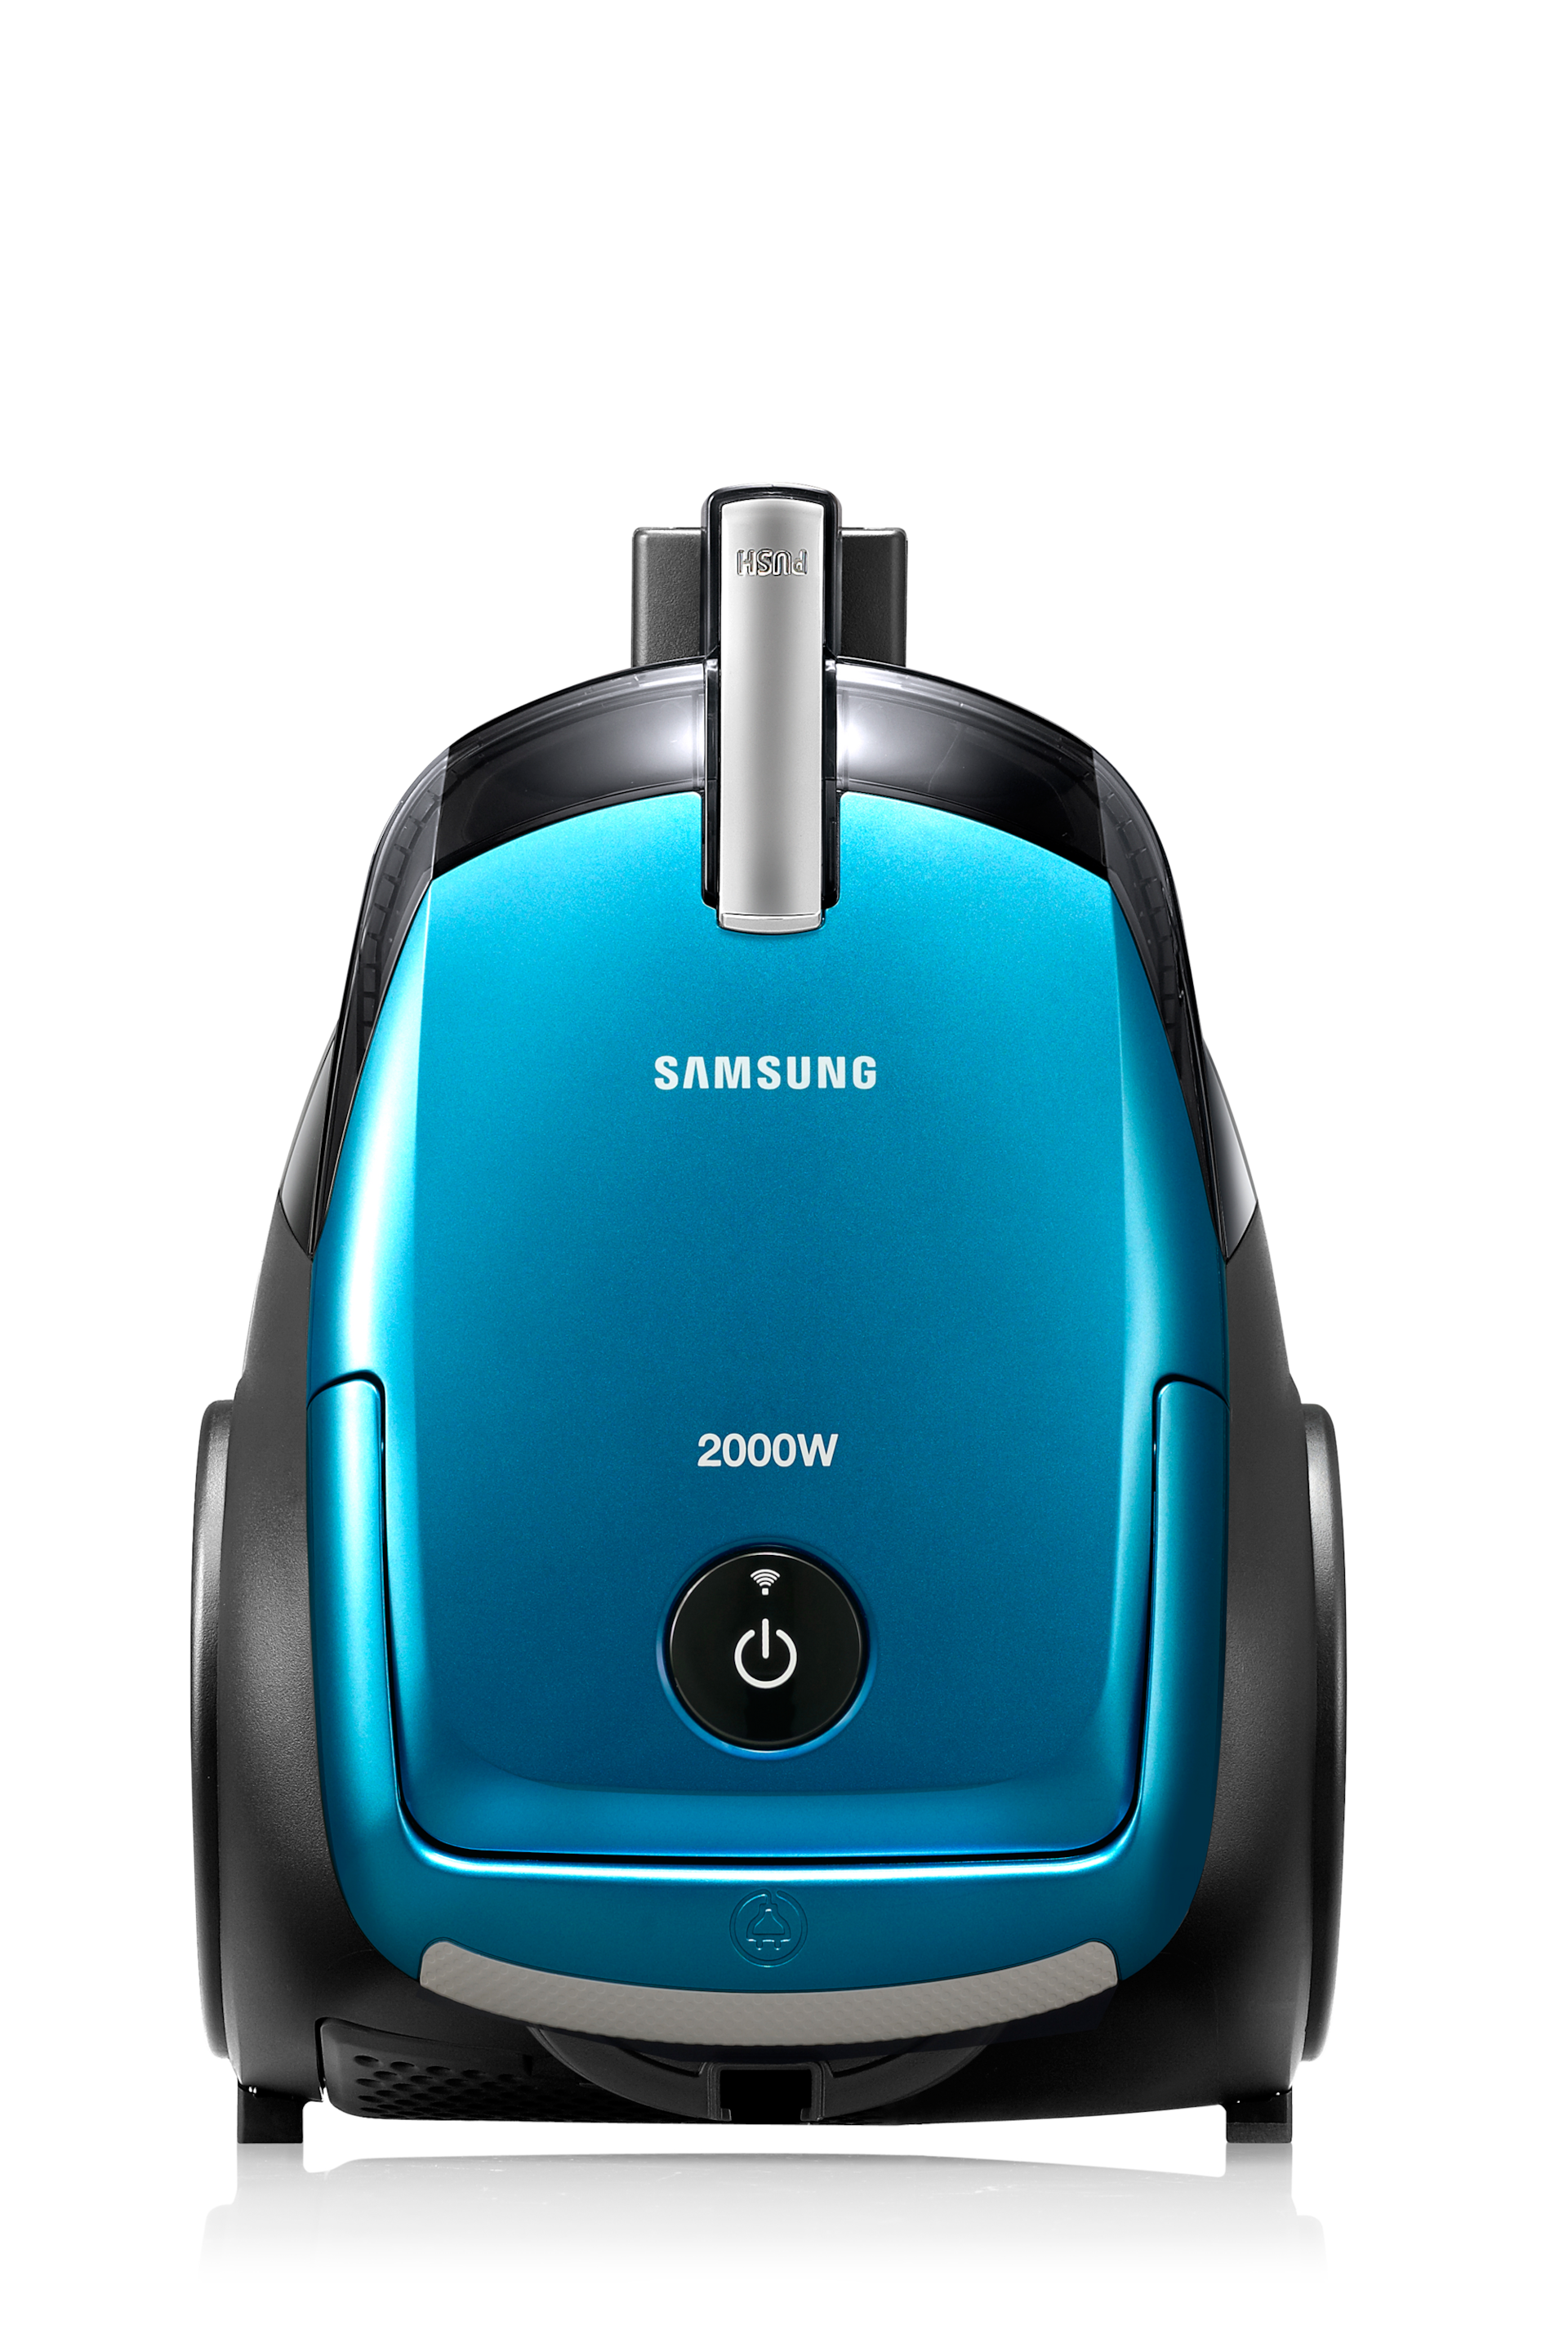 Samsung Vacuum Cleaner VCDC20AV Price, Home Vacuum Cleaner, Features, Reviews